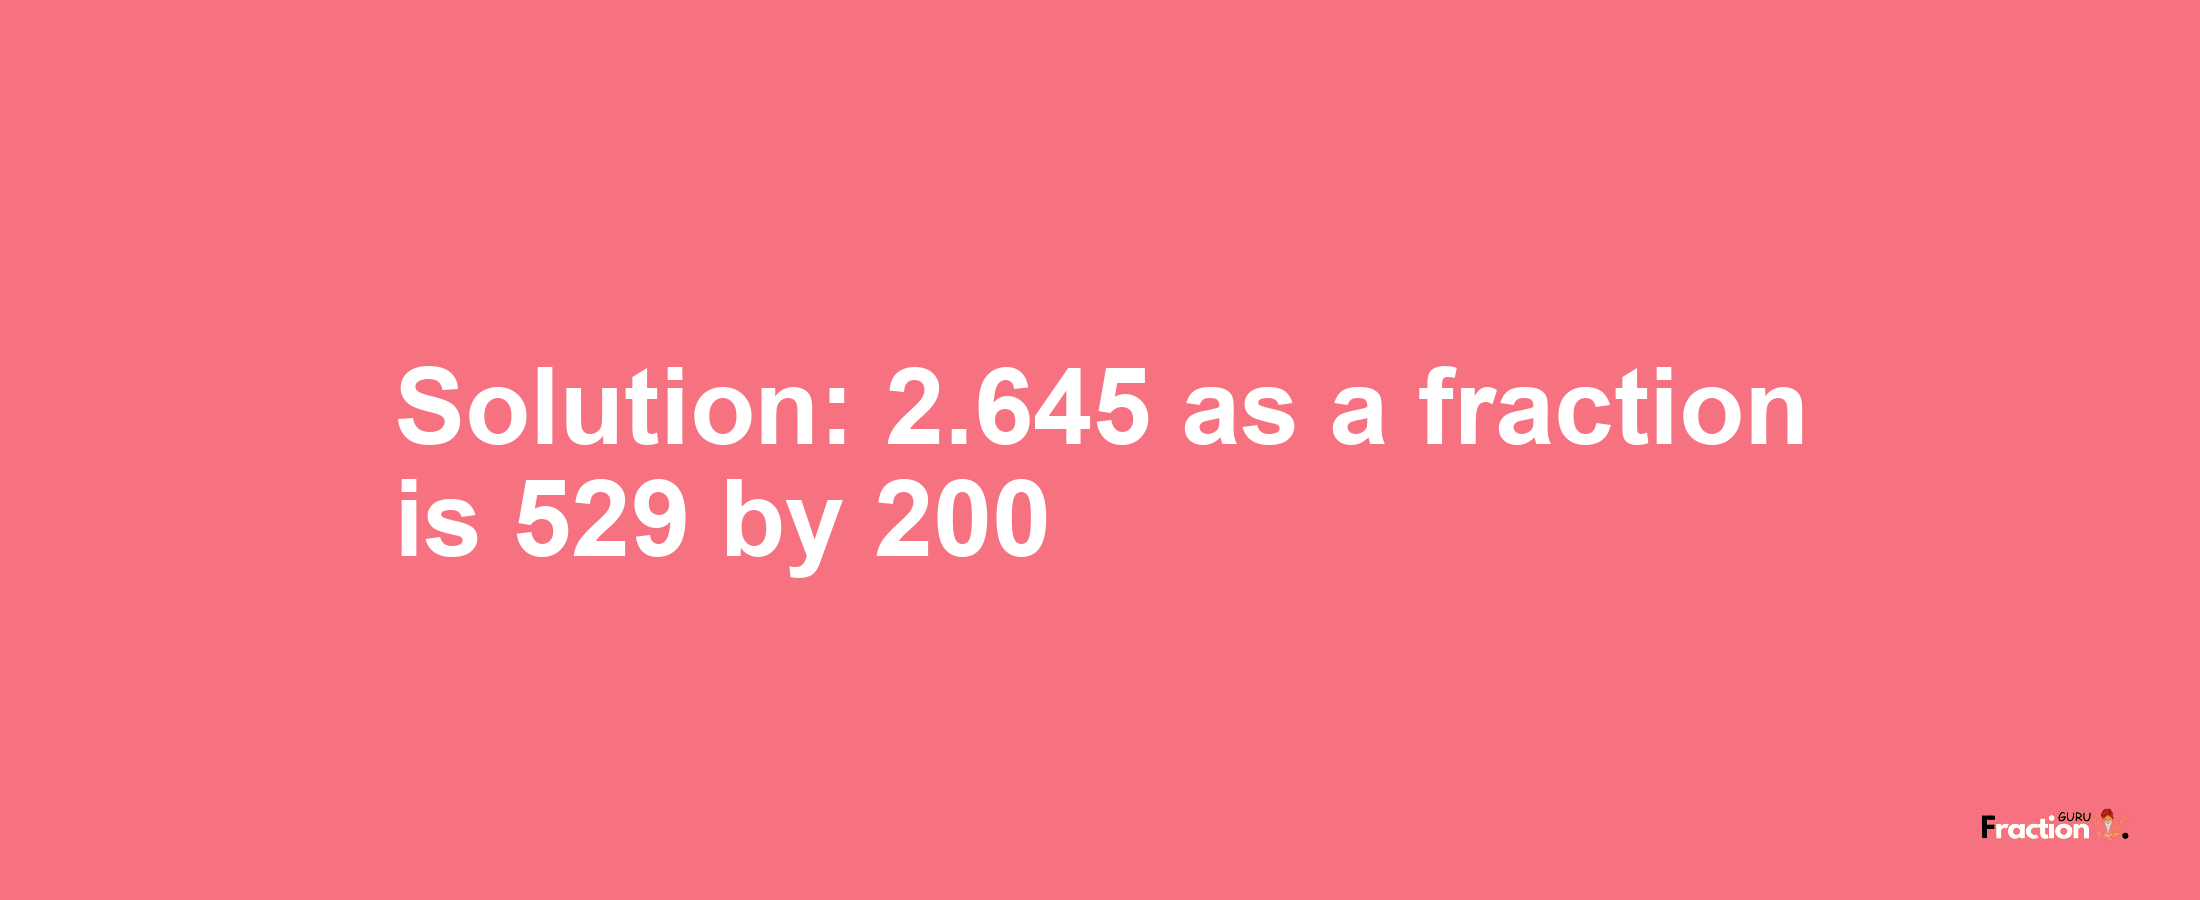 Solution:2.645 as a fraction is 529/200